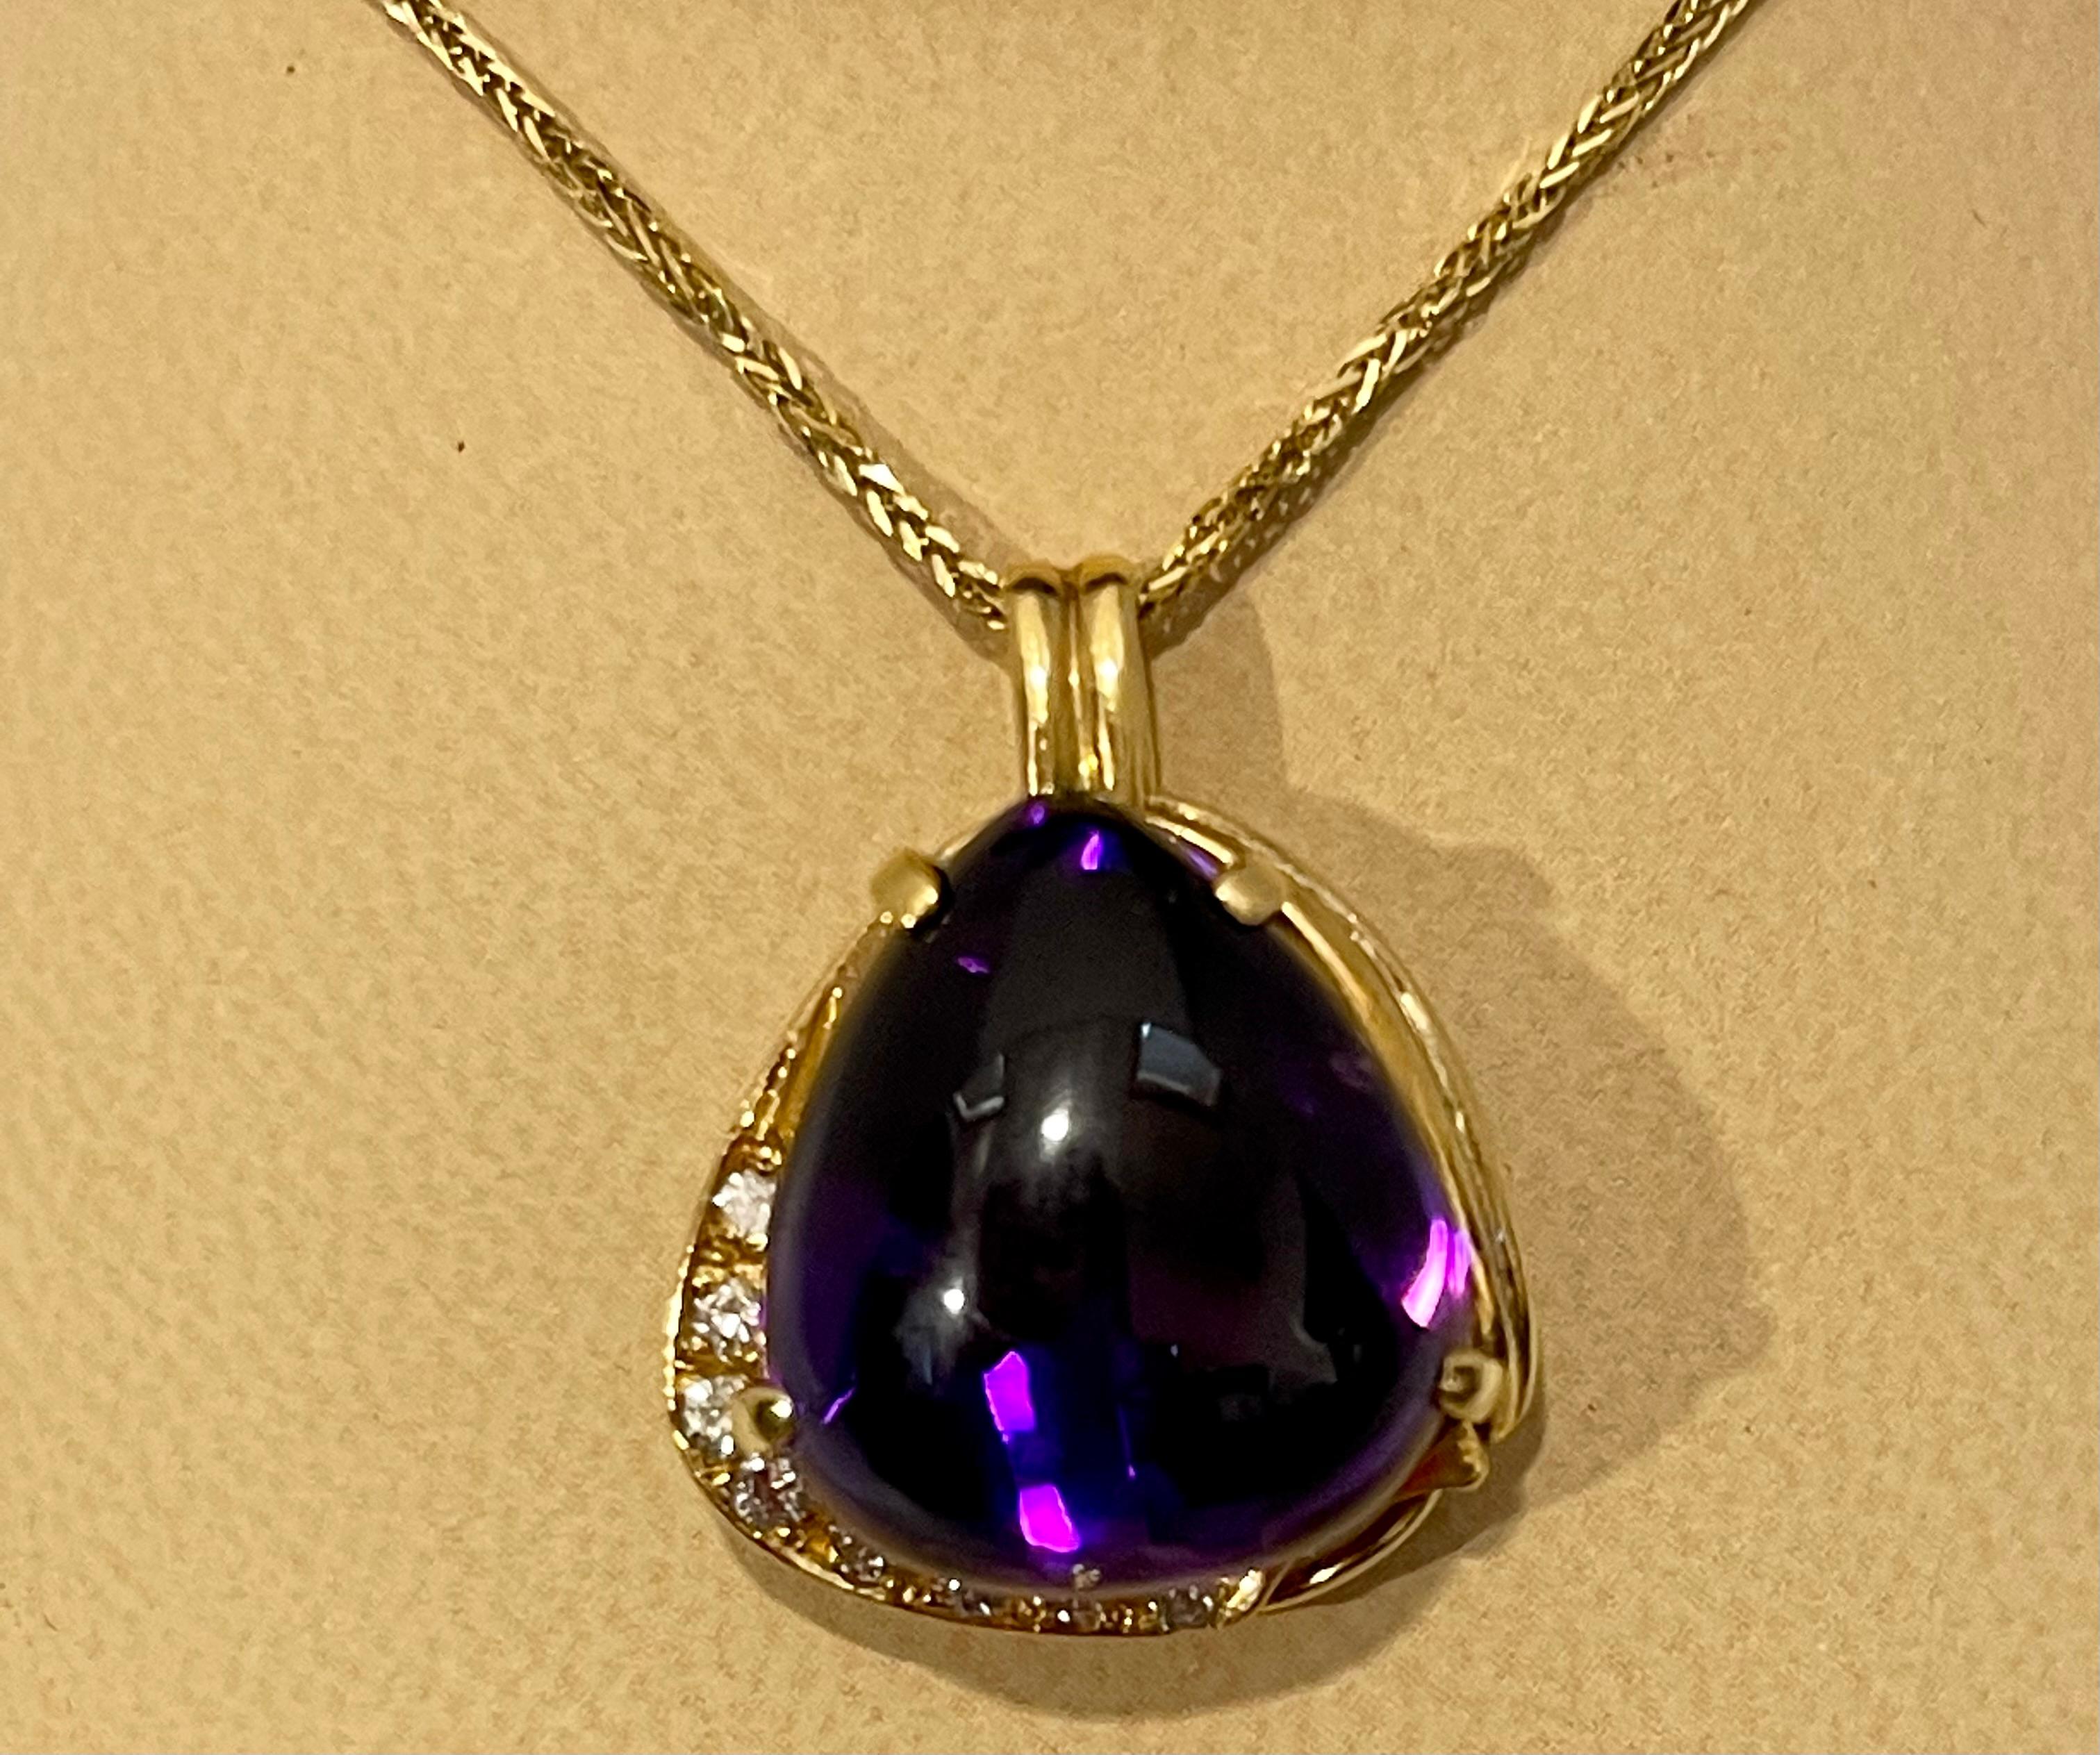 10 Carat Tear Drop Amethyst and Diamonds Pendent Necklace 18 Karat Yellow Gold For Sale 13